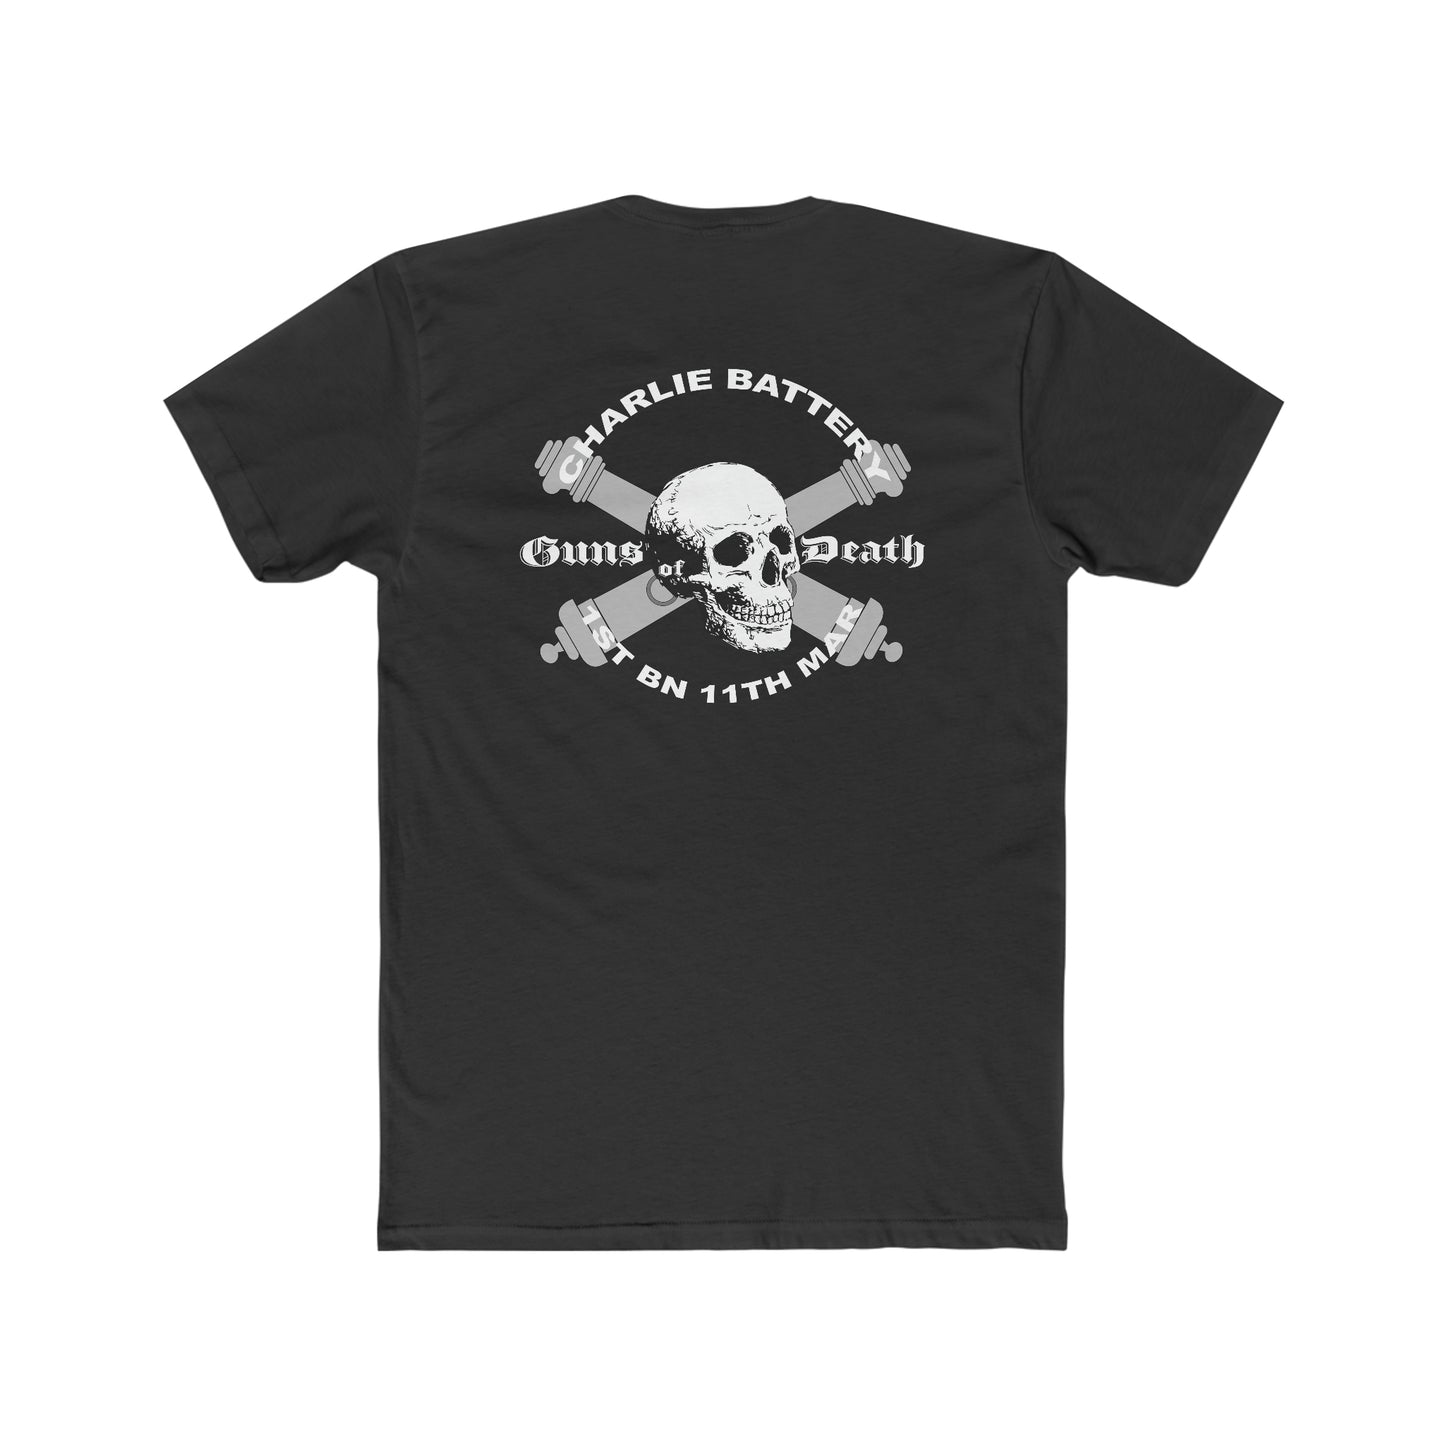 Charlie Battery 3rd Battalion 11th Marines Tee